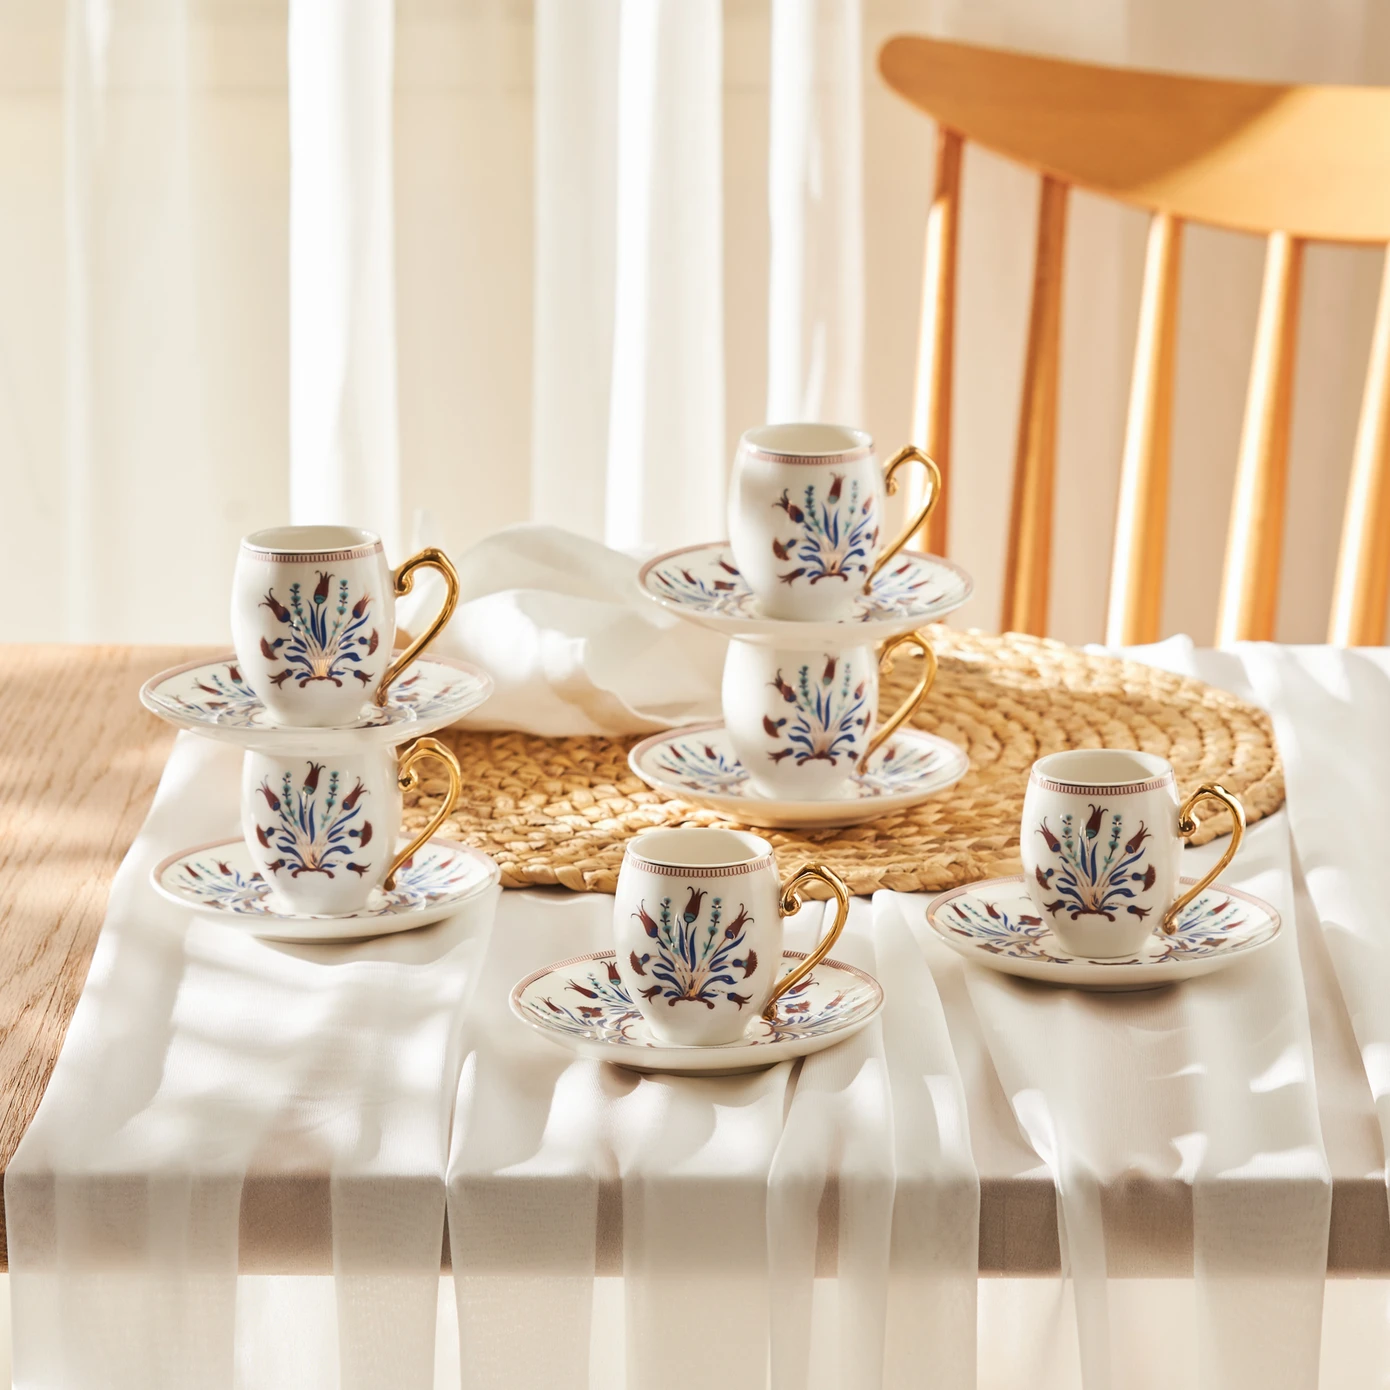 Finike, 12 Piece Porcelain Espresso Turkish Coffee Cup for 6 People, 80ml, White Multi